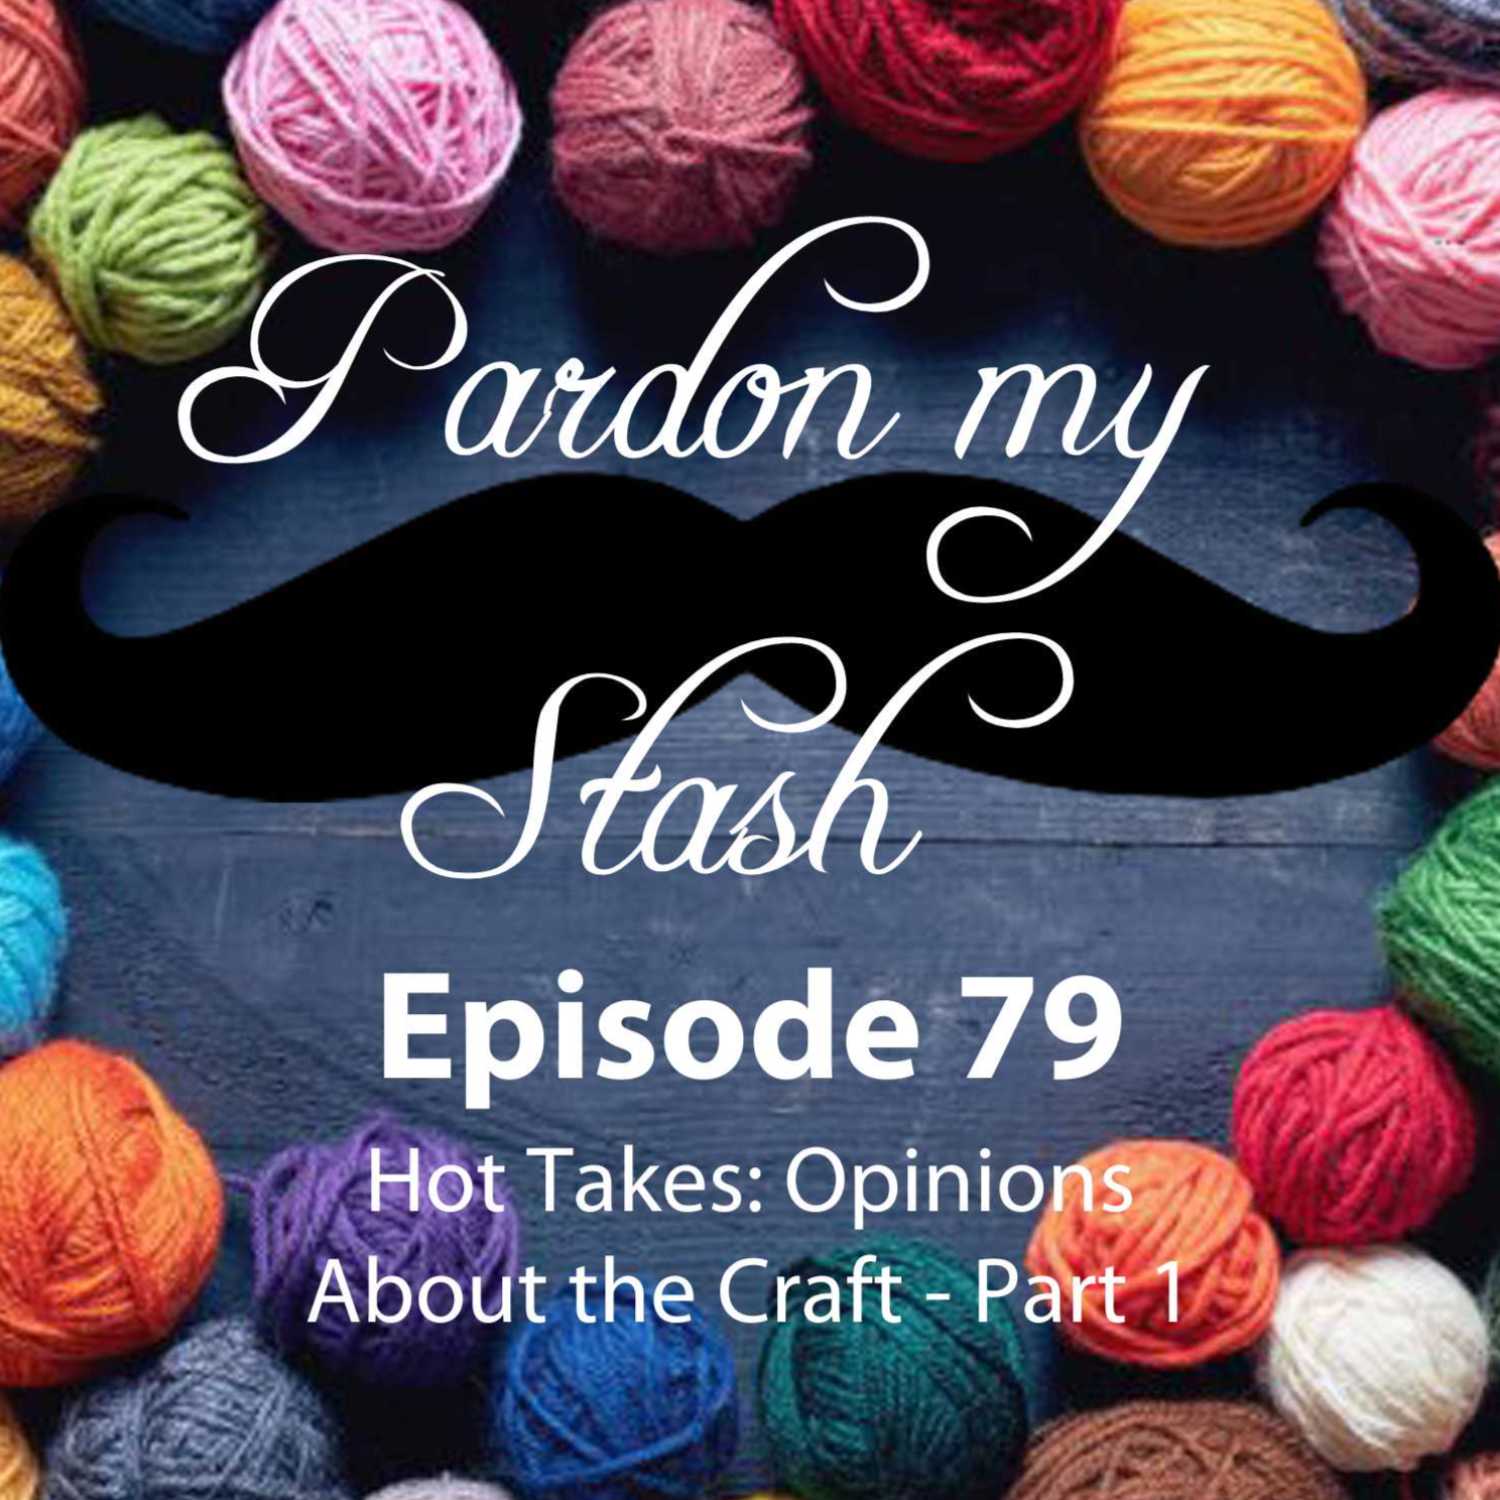 Hot Takes: Opinions About the Craft - Part 1